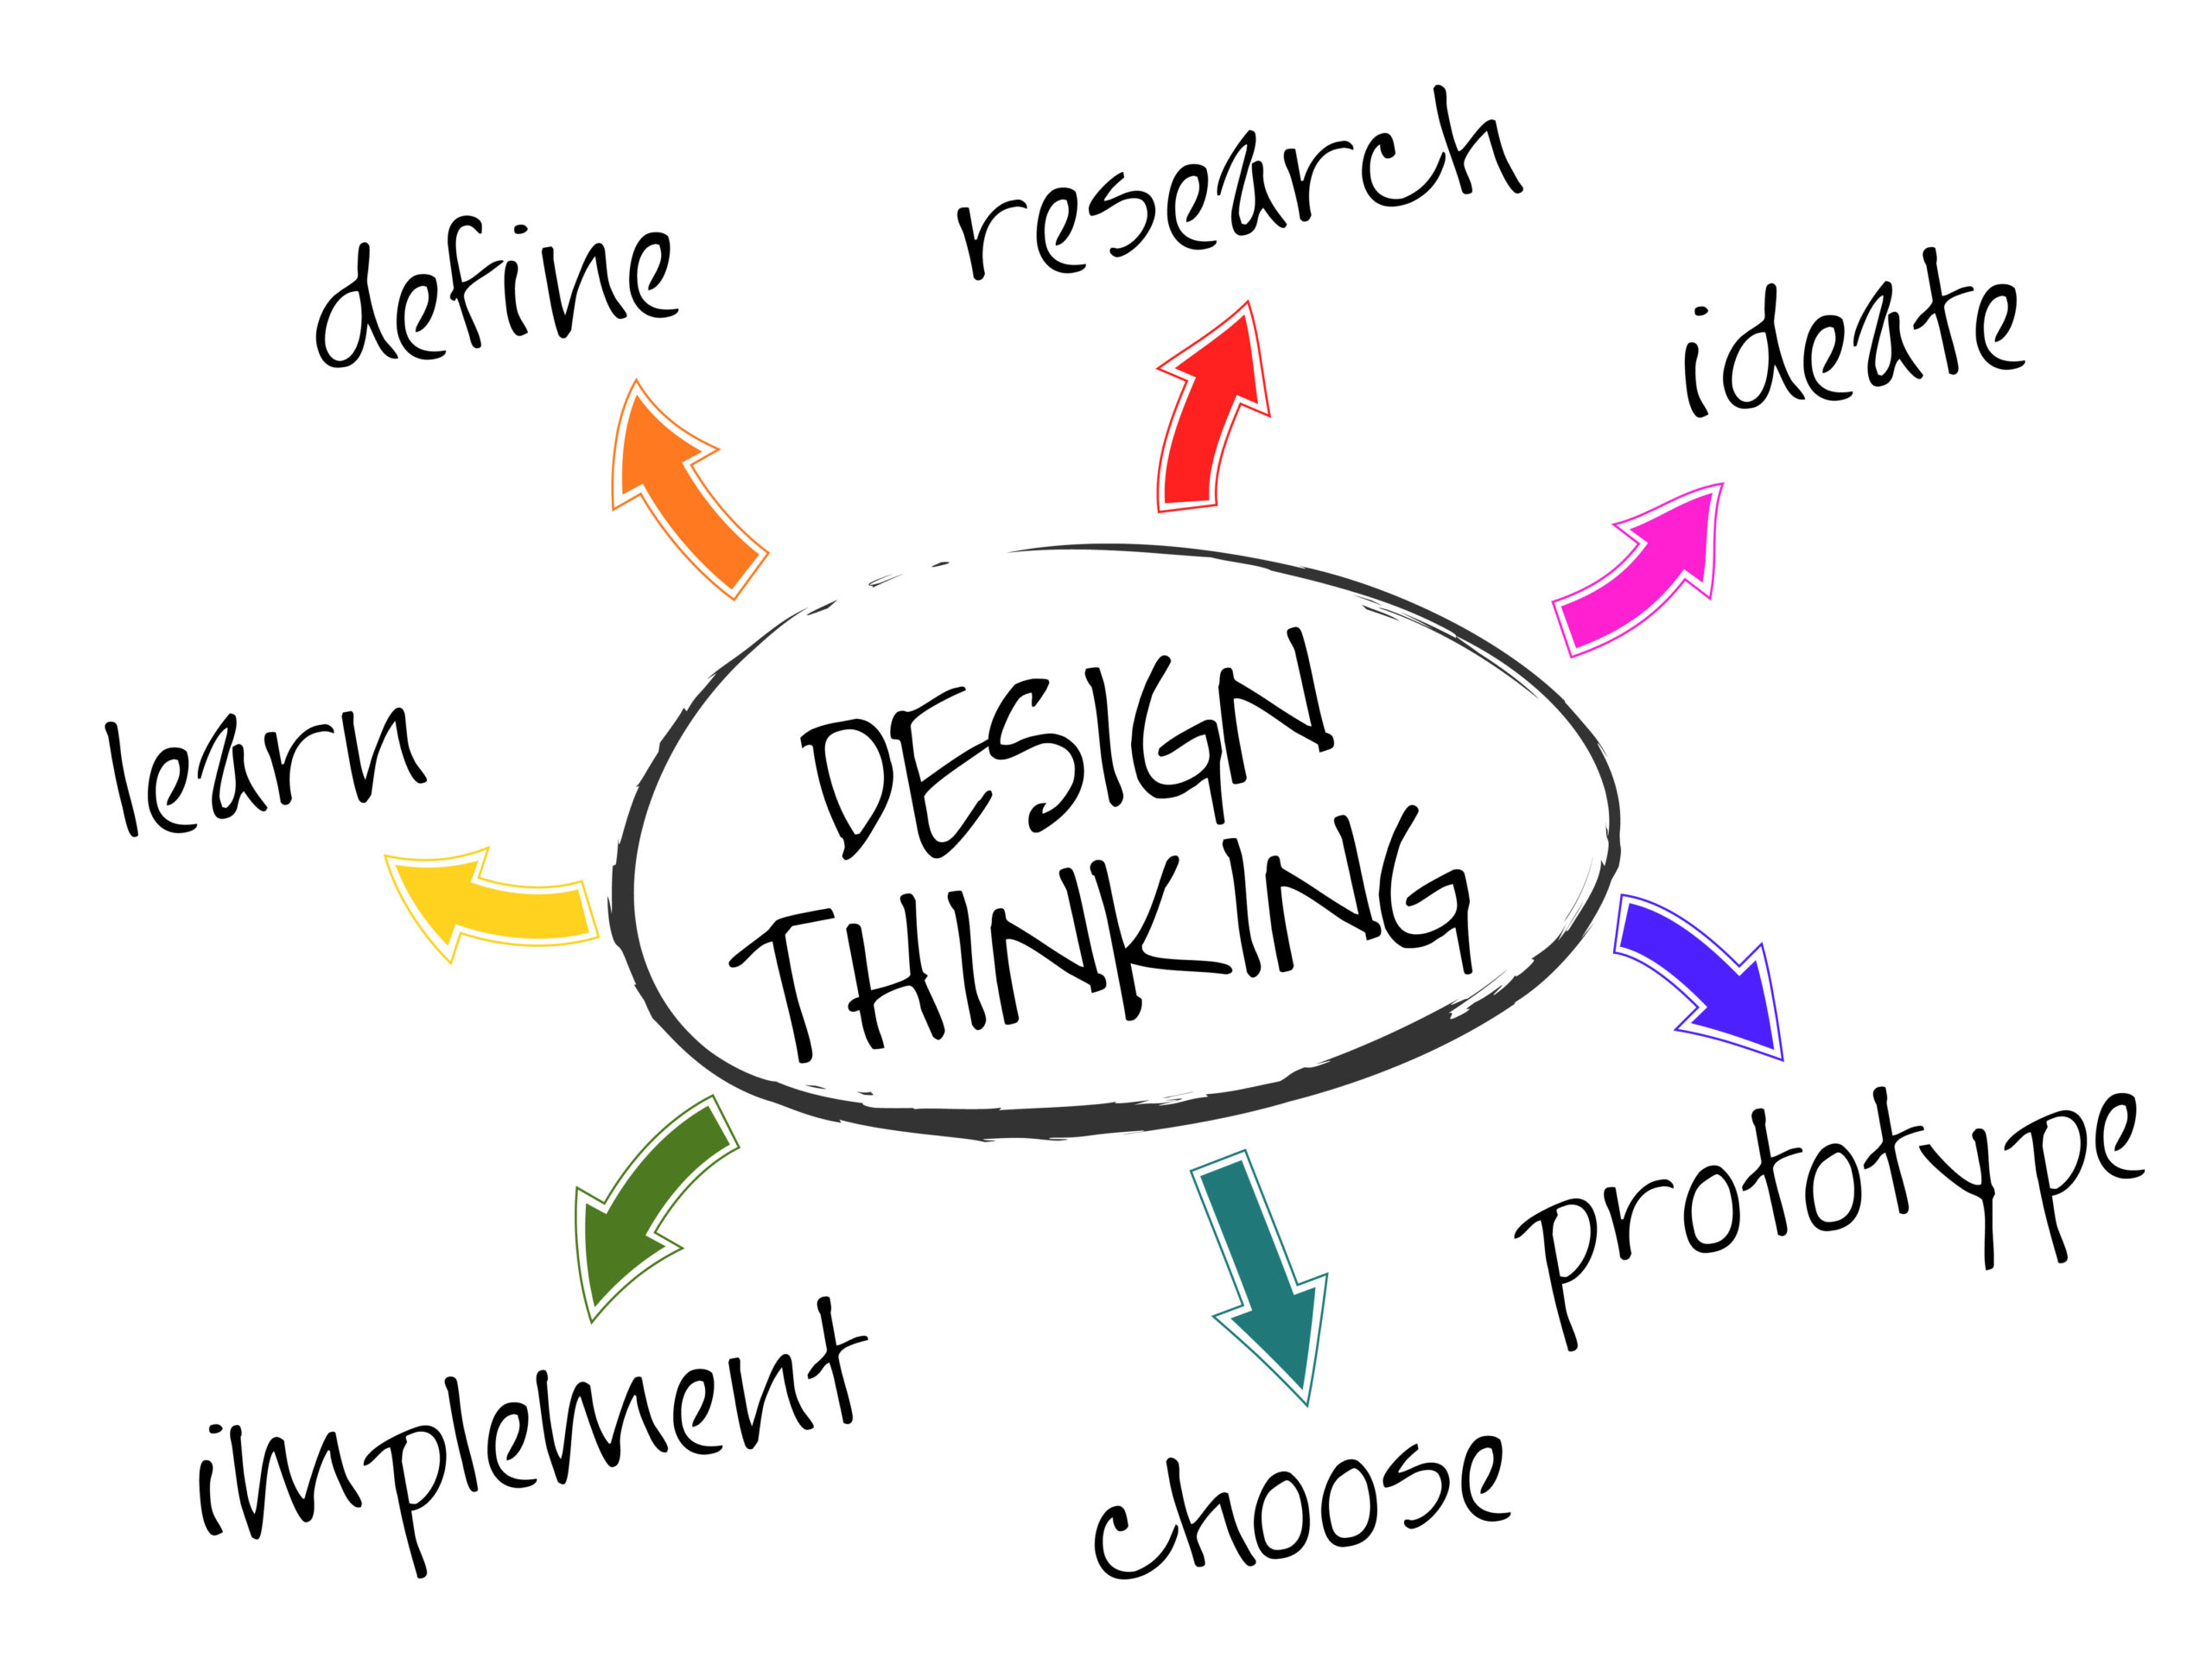 MBM 2020 – Is design thinking the next normal?